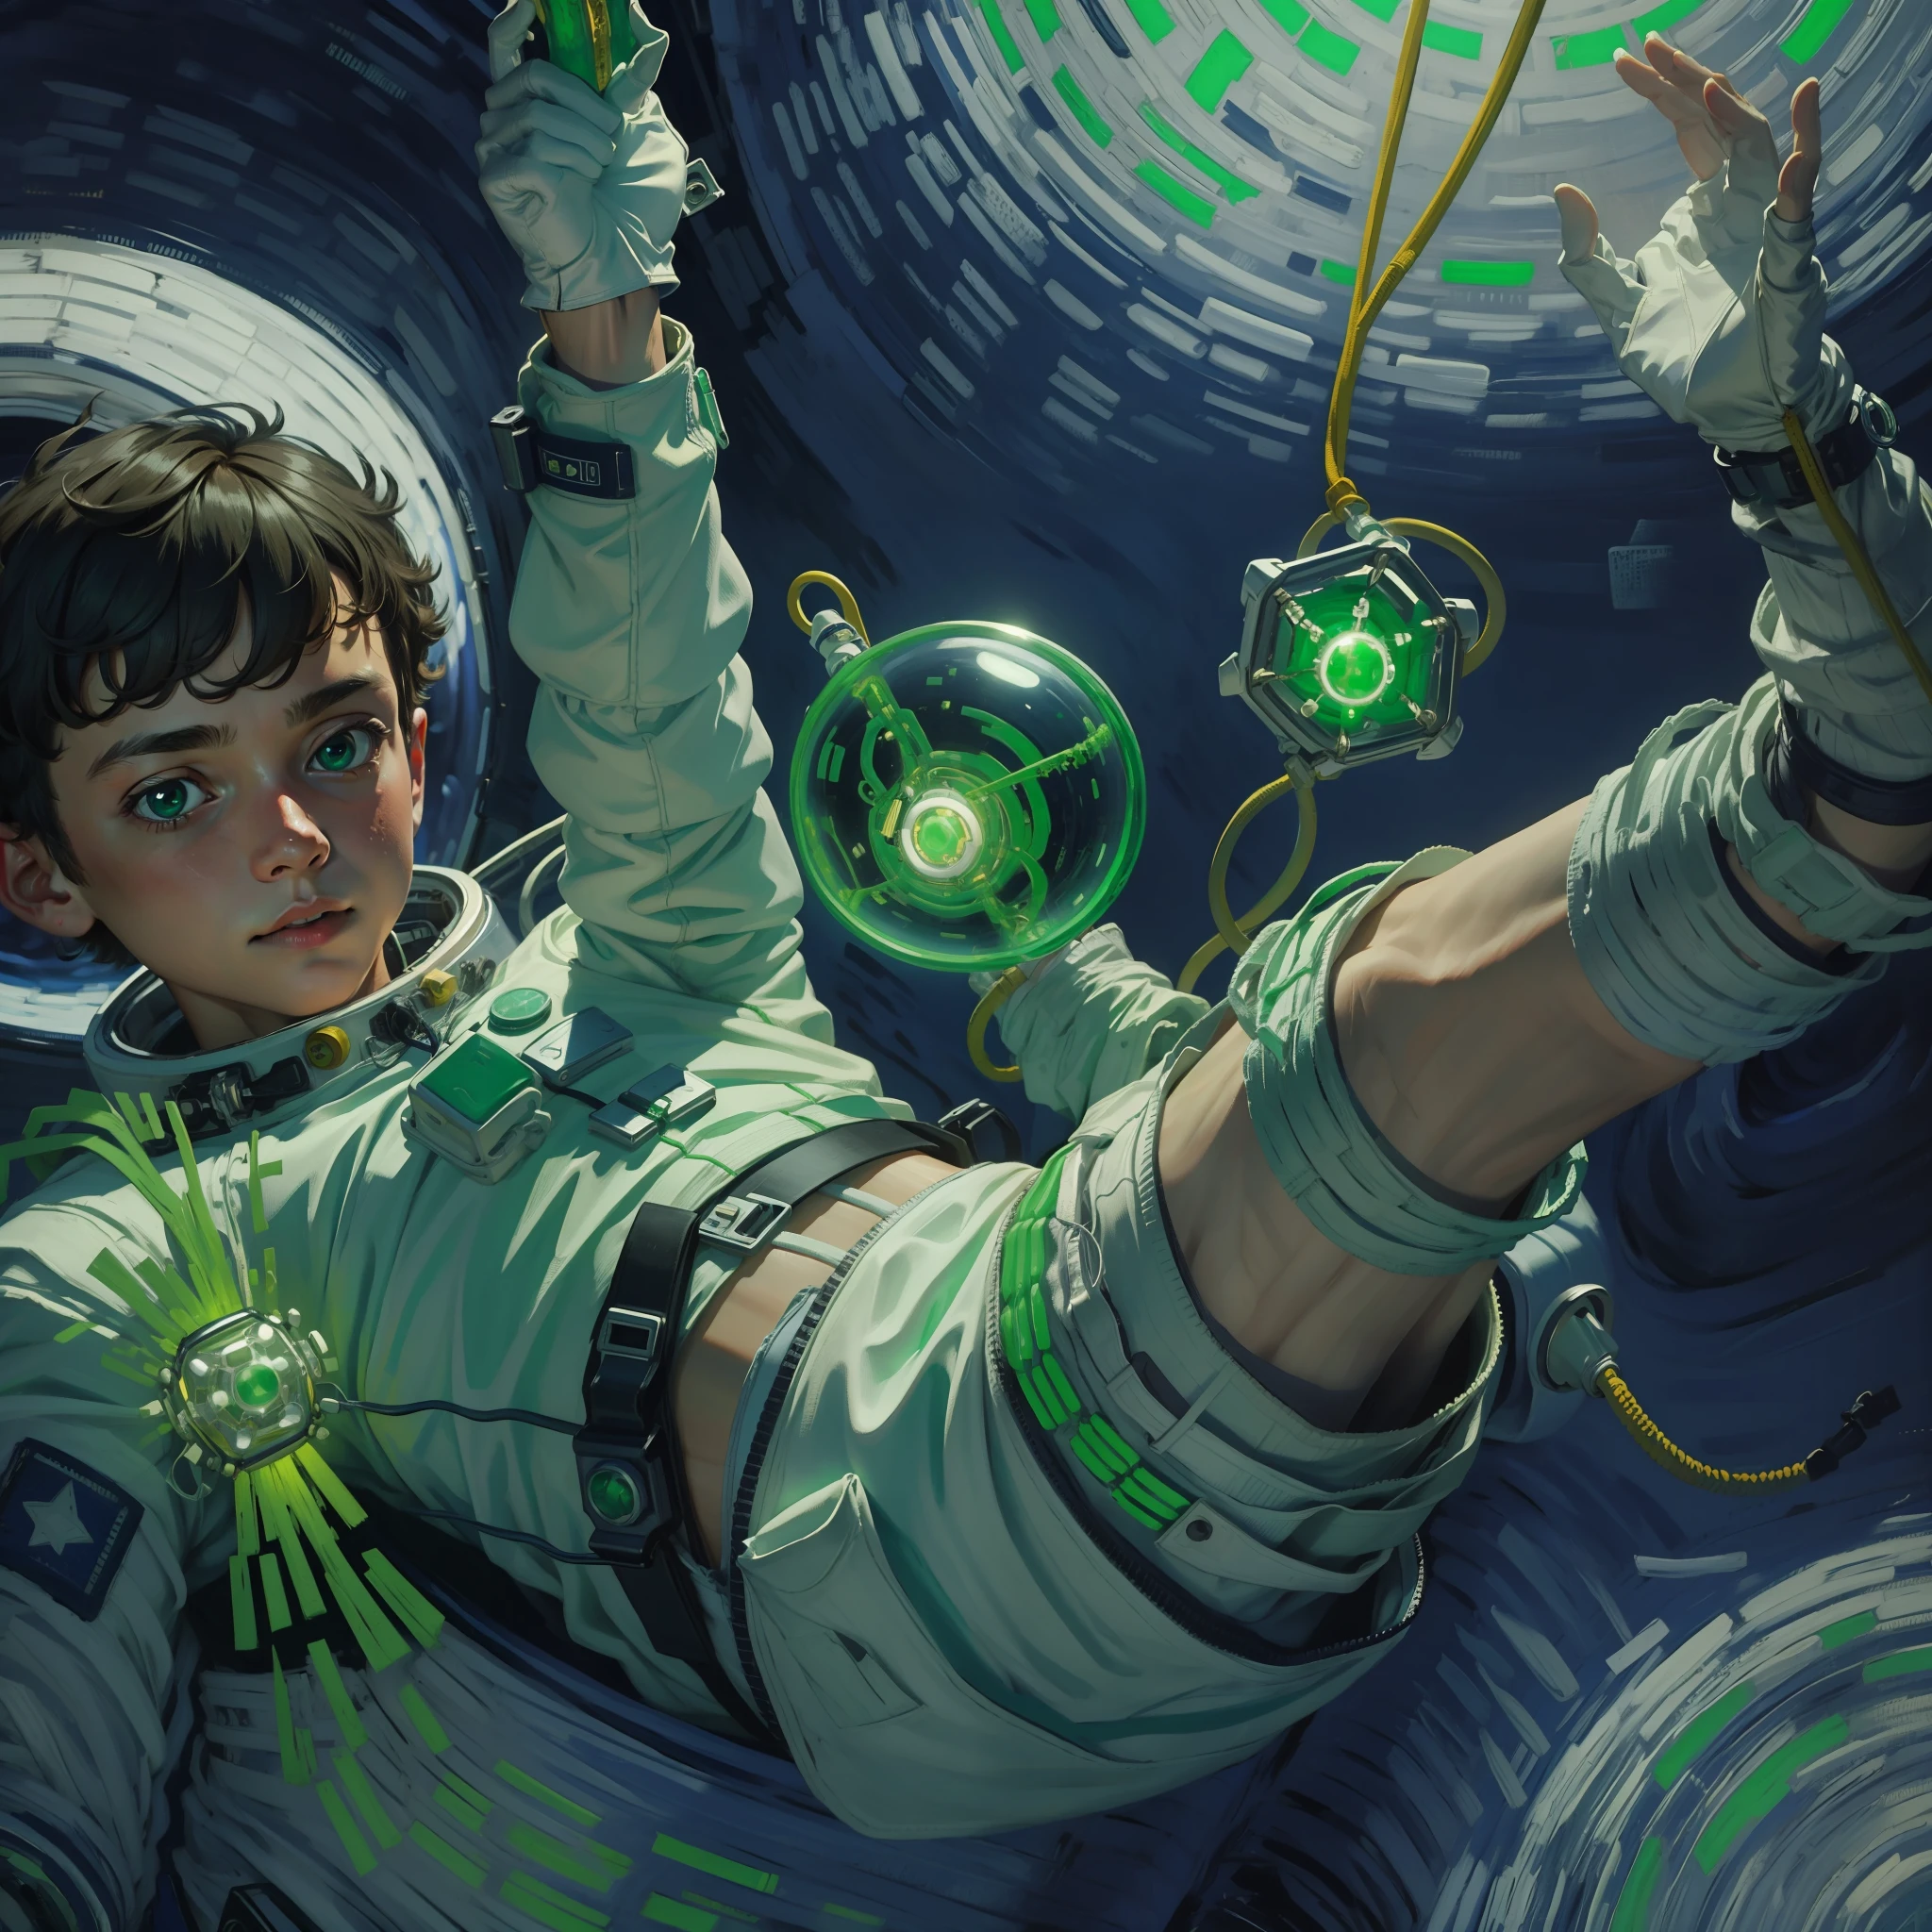 vg,details,a boy in an astronaut suit floating in space, waist tied with a safety rope, holding a green glowing star,white gloves